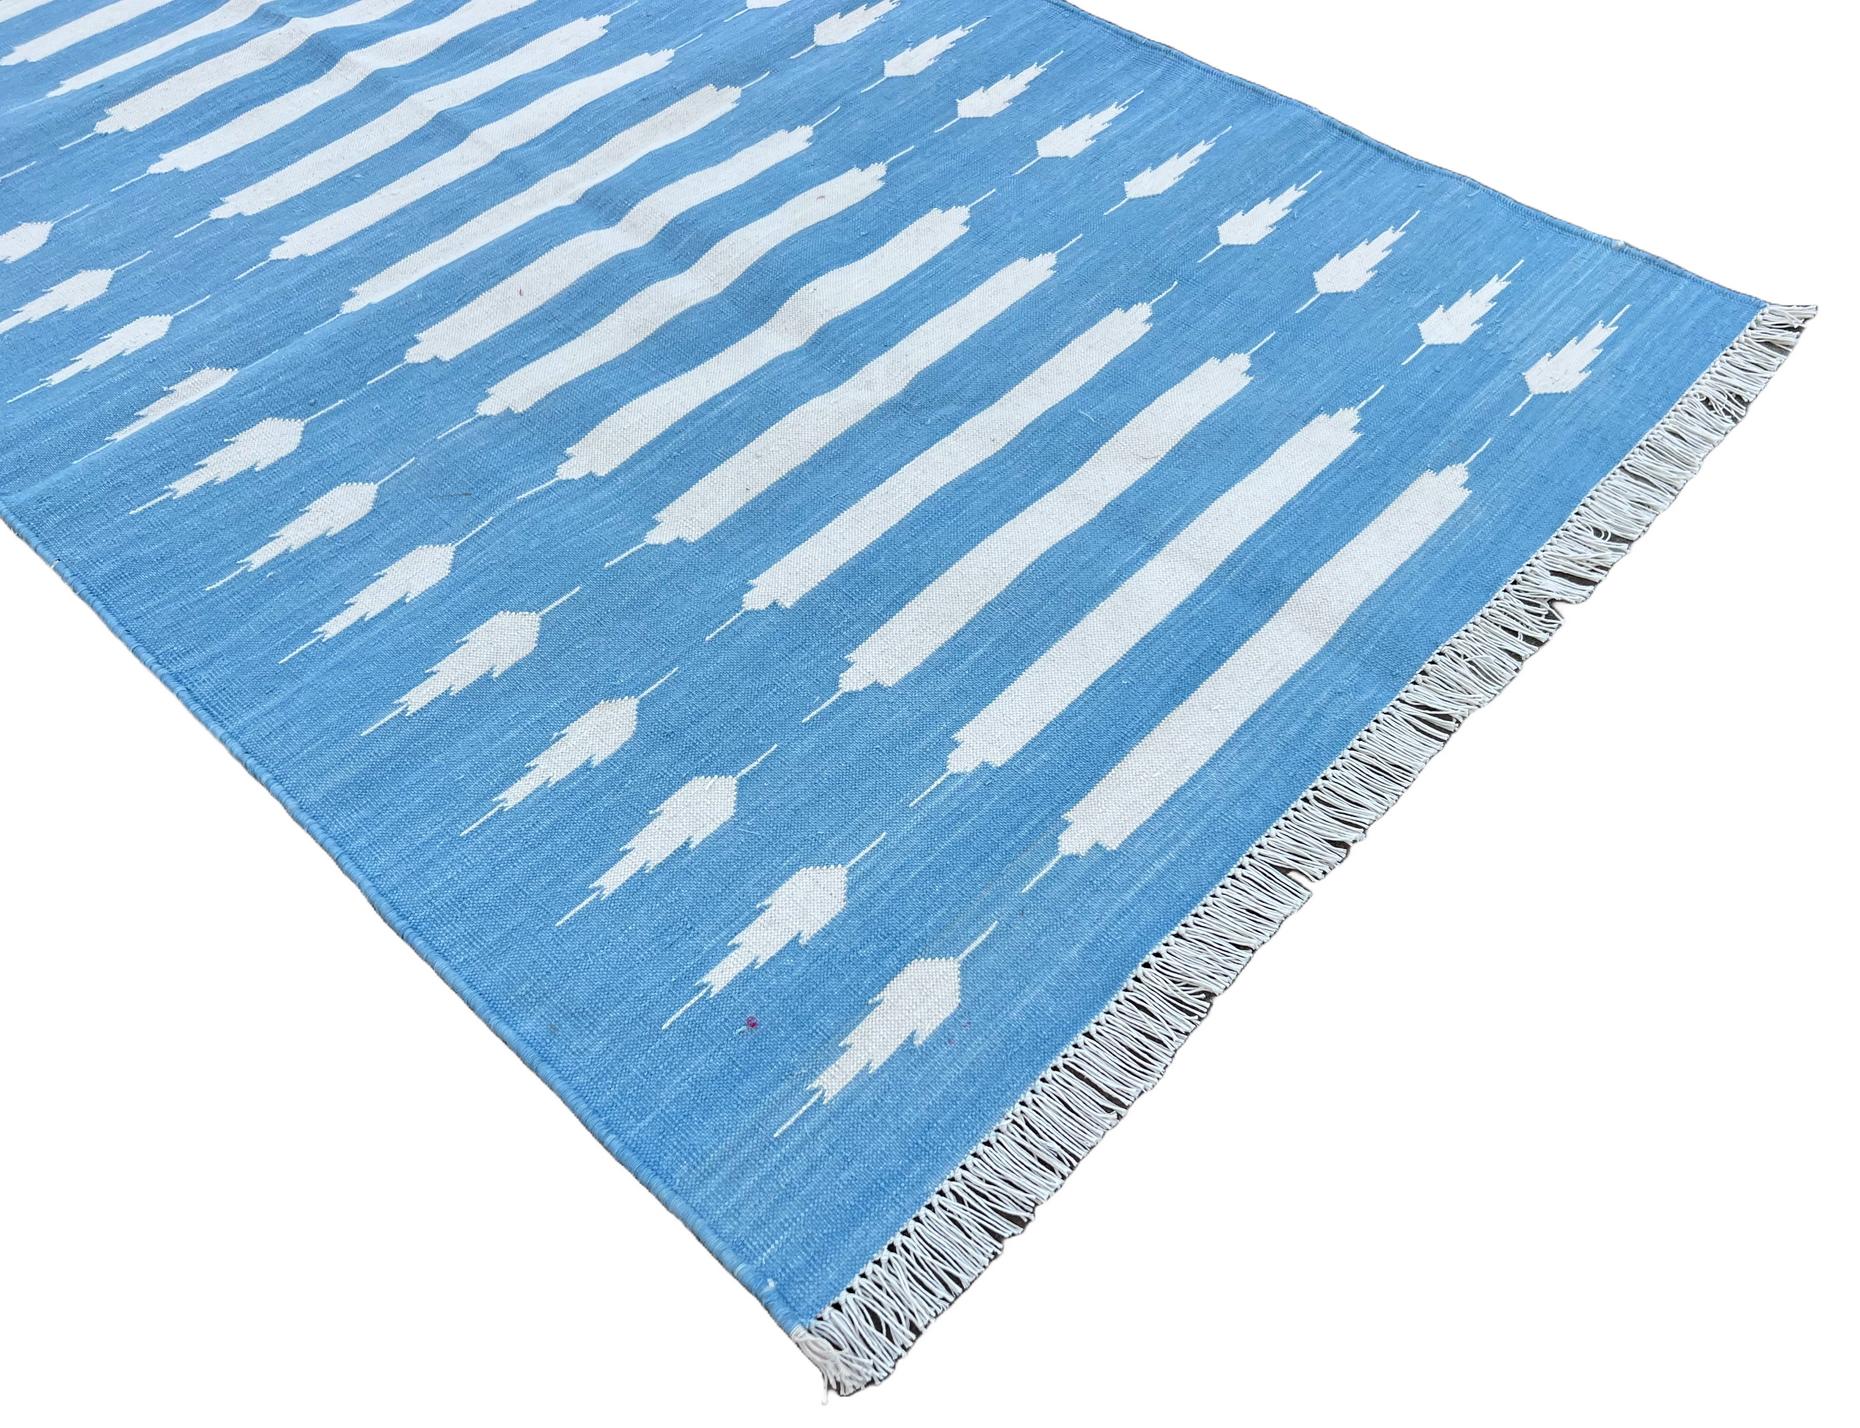 Hand-Woven Handmade Cotton Area Flat Weave Rug, 3x5 Blue And White Striped Indian Dhurrie For Sale